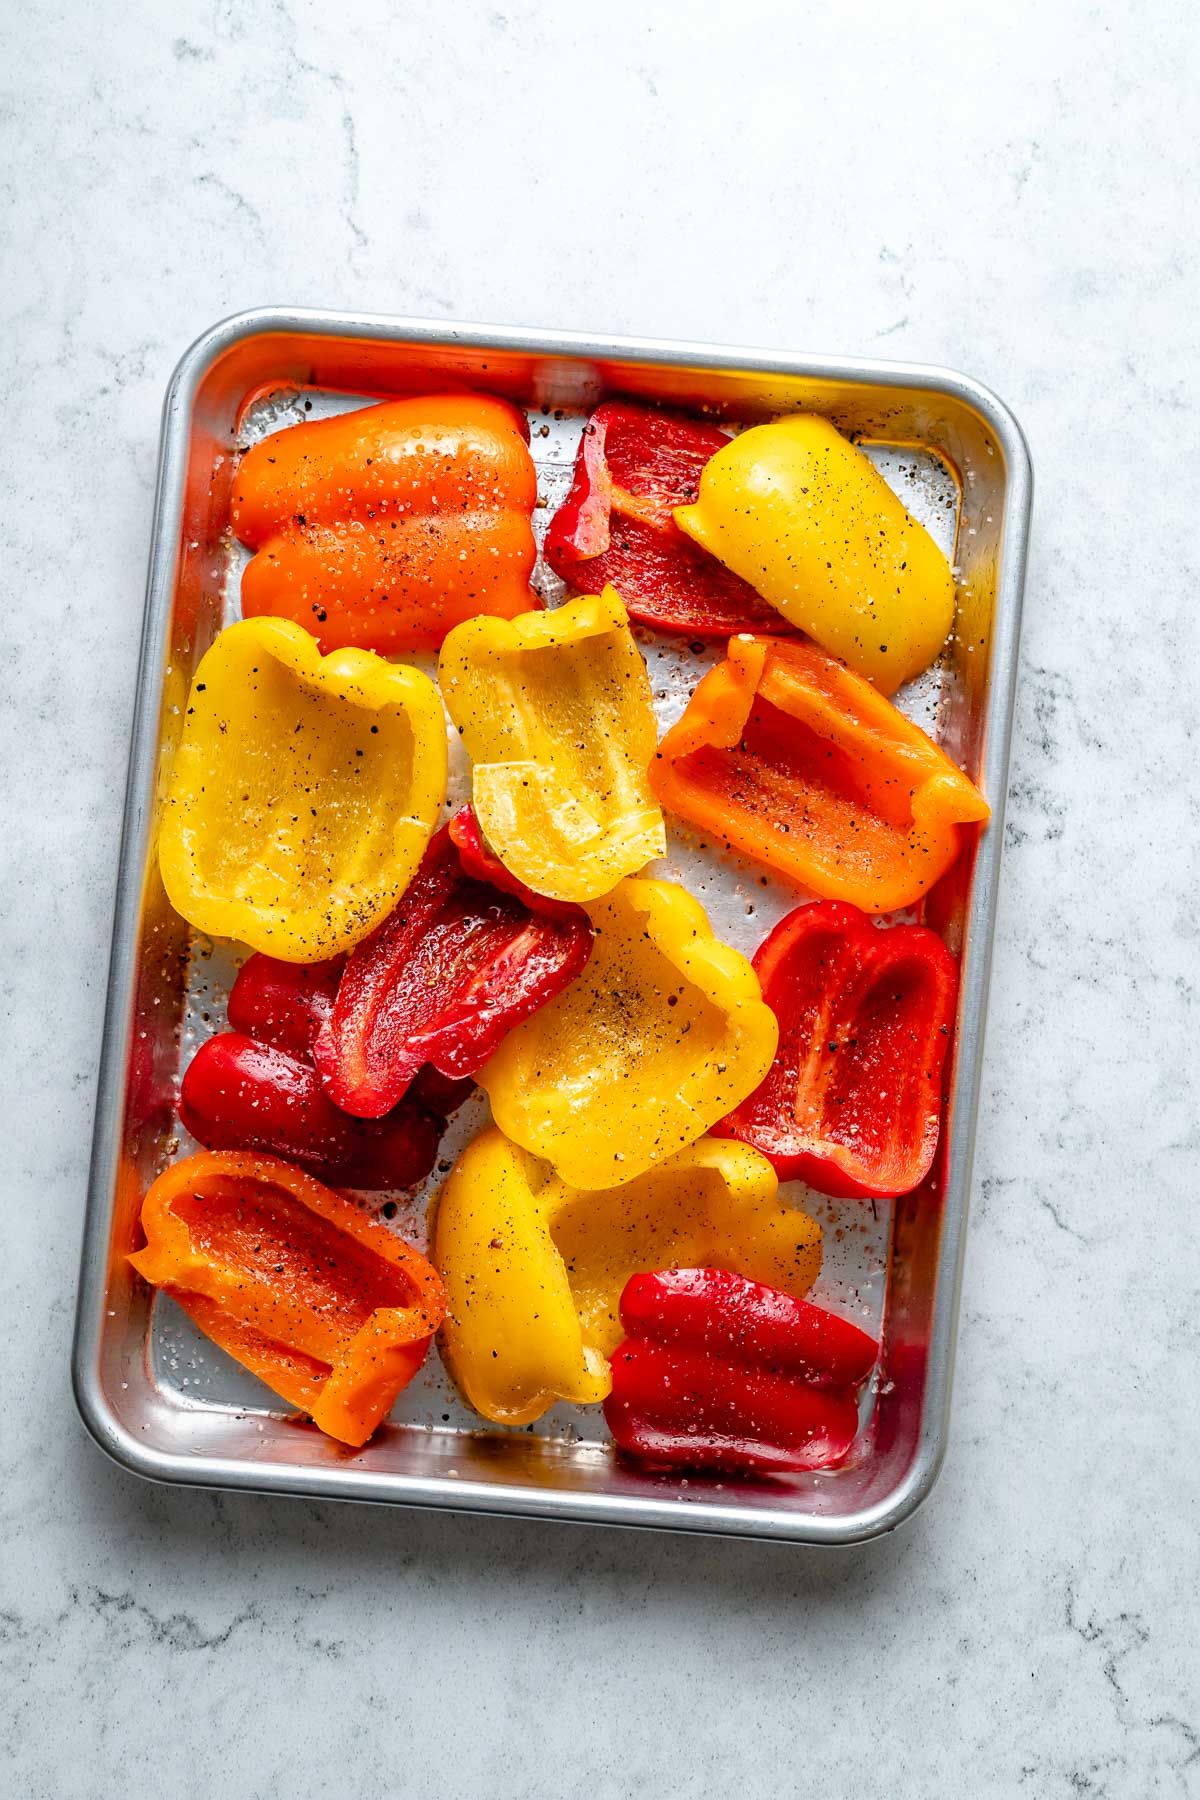 Multiple slices of fresh & raw yellow, orange, & red bell peppers seasoned with avocado oil, kosher salt, & ground black pepper arranged on an aluminum baking sheet. The baking sheet sits on top of a white & gray marble surface.